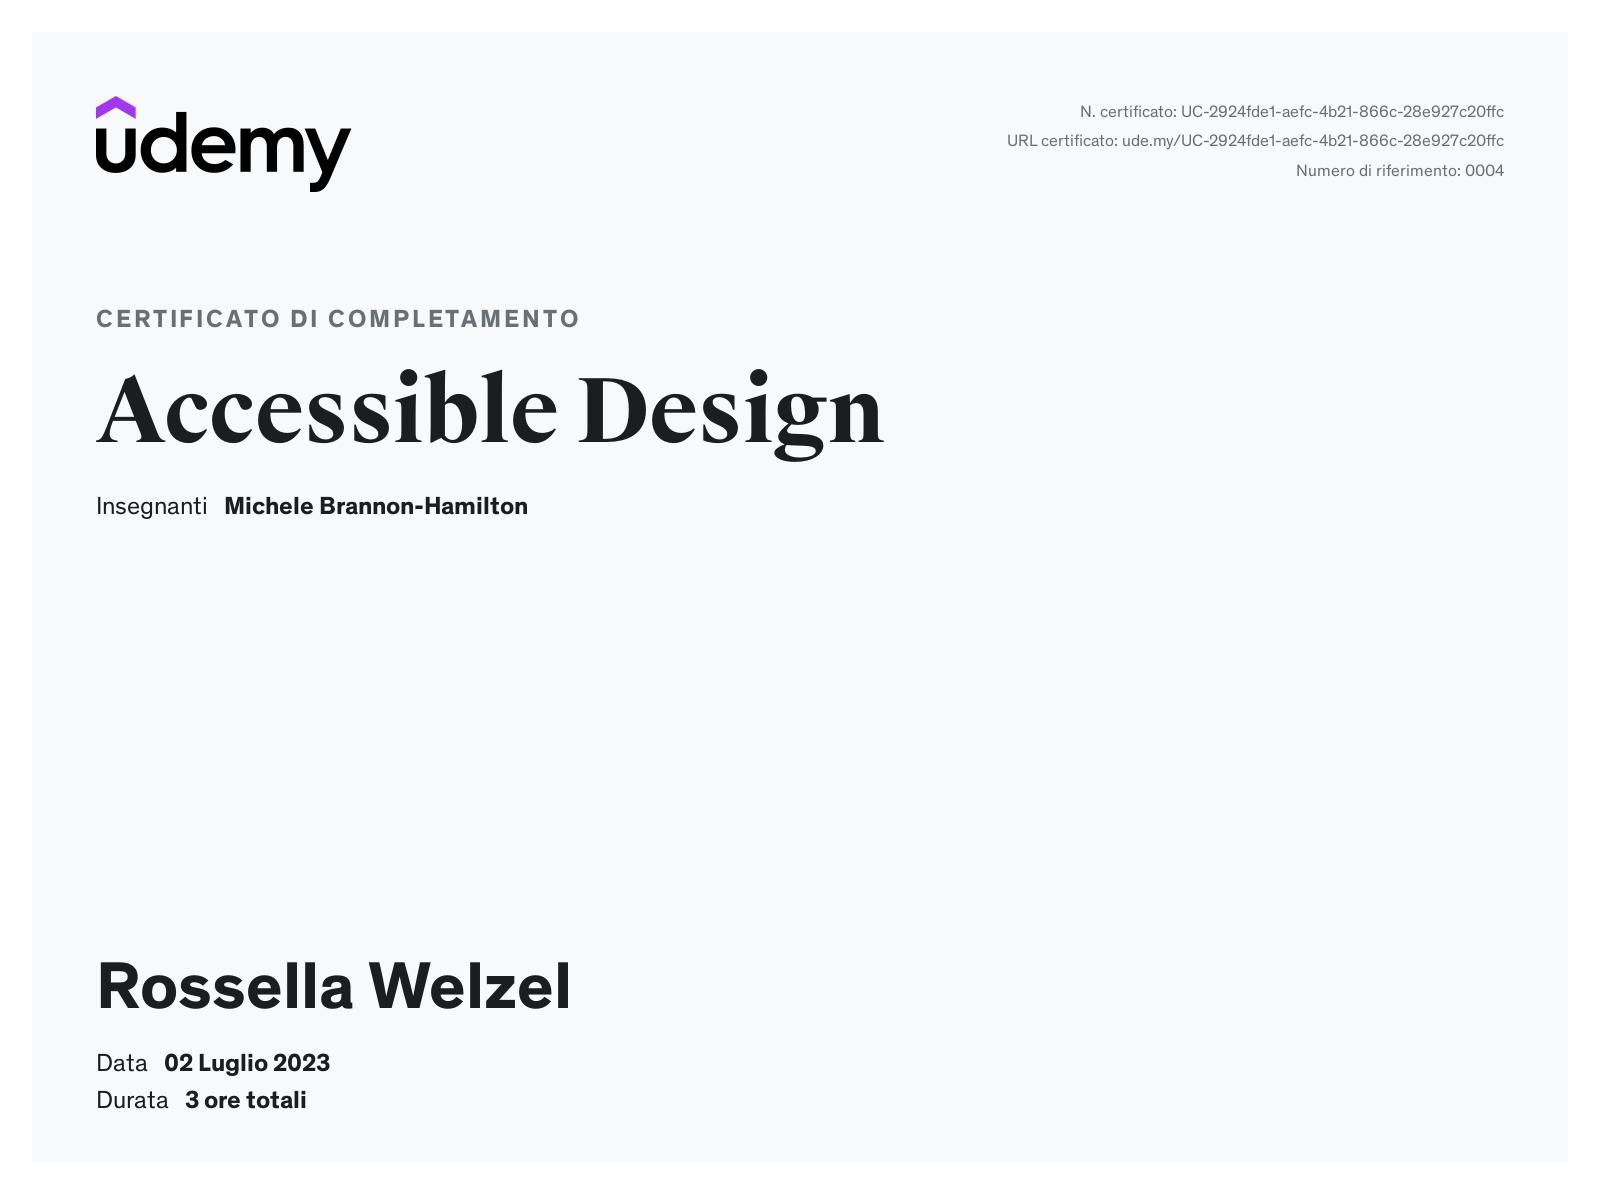 Certificate of completion to Rossella Welzel for Accessible Design Course, Udemy platform